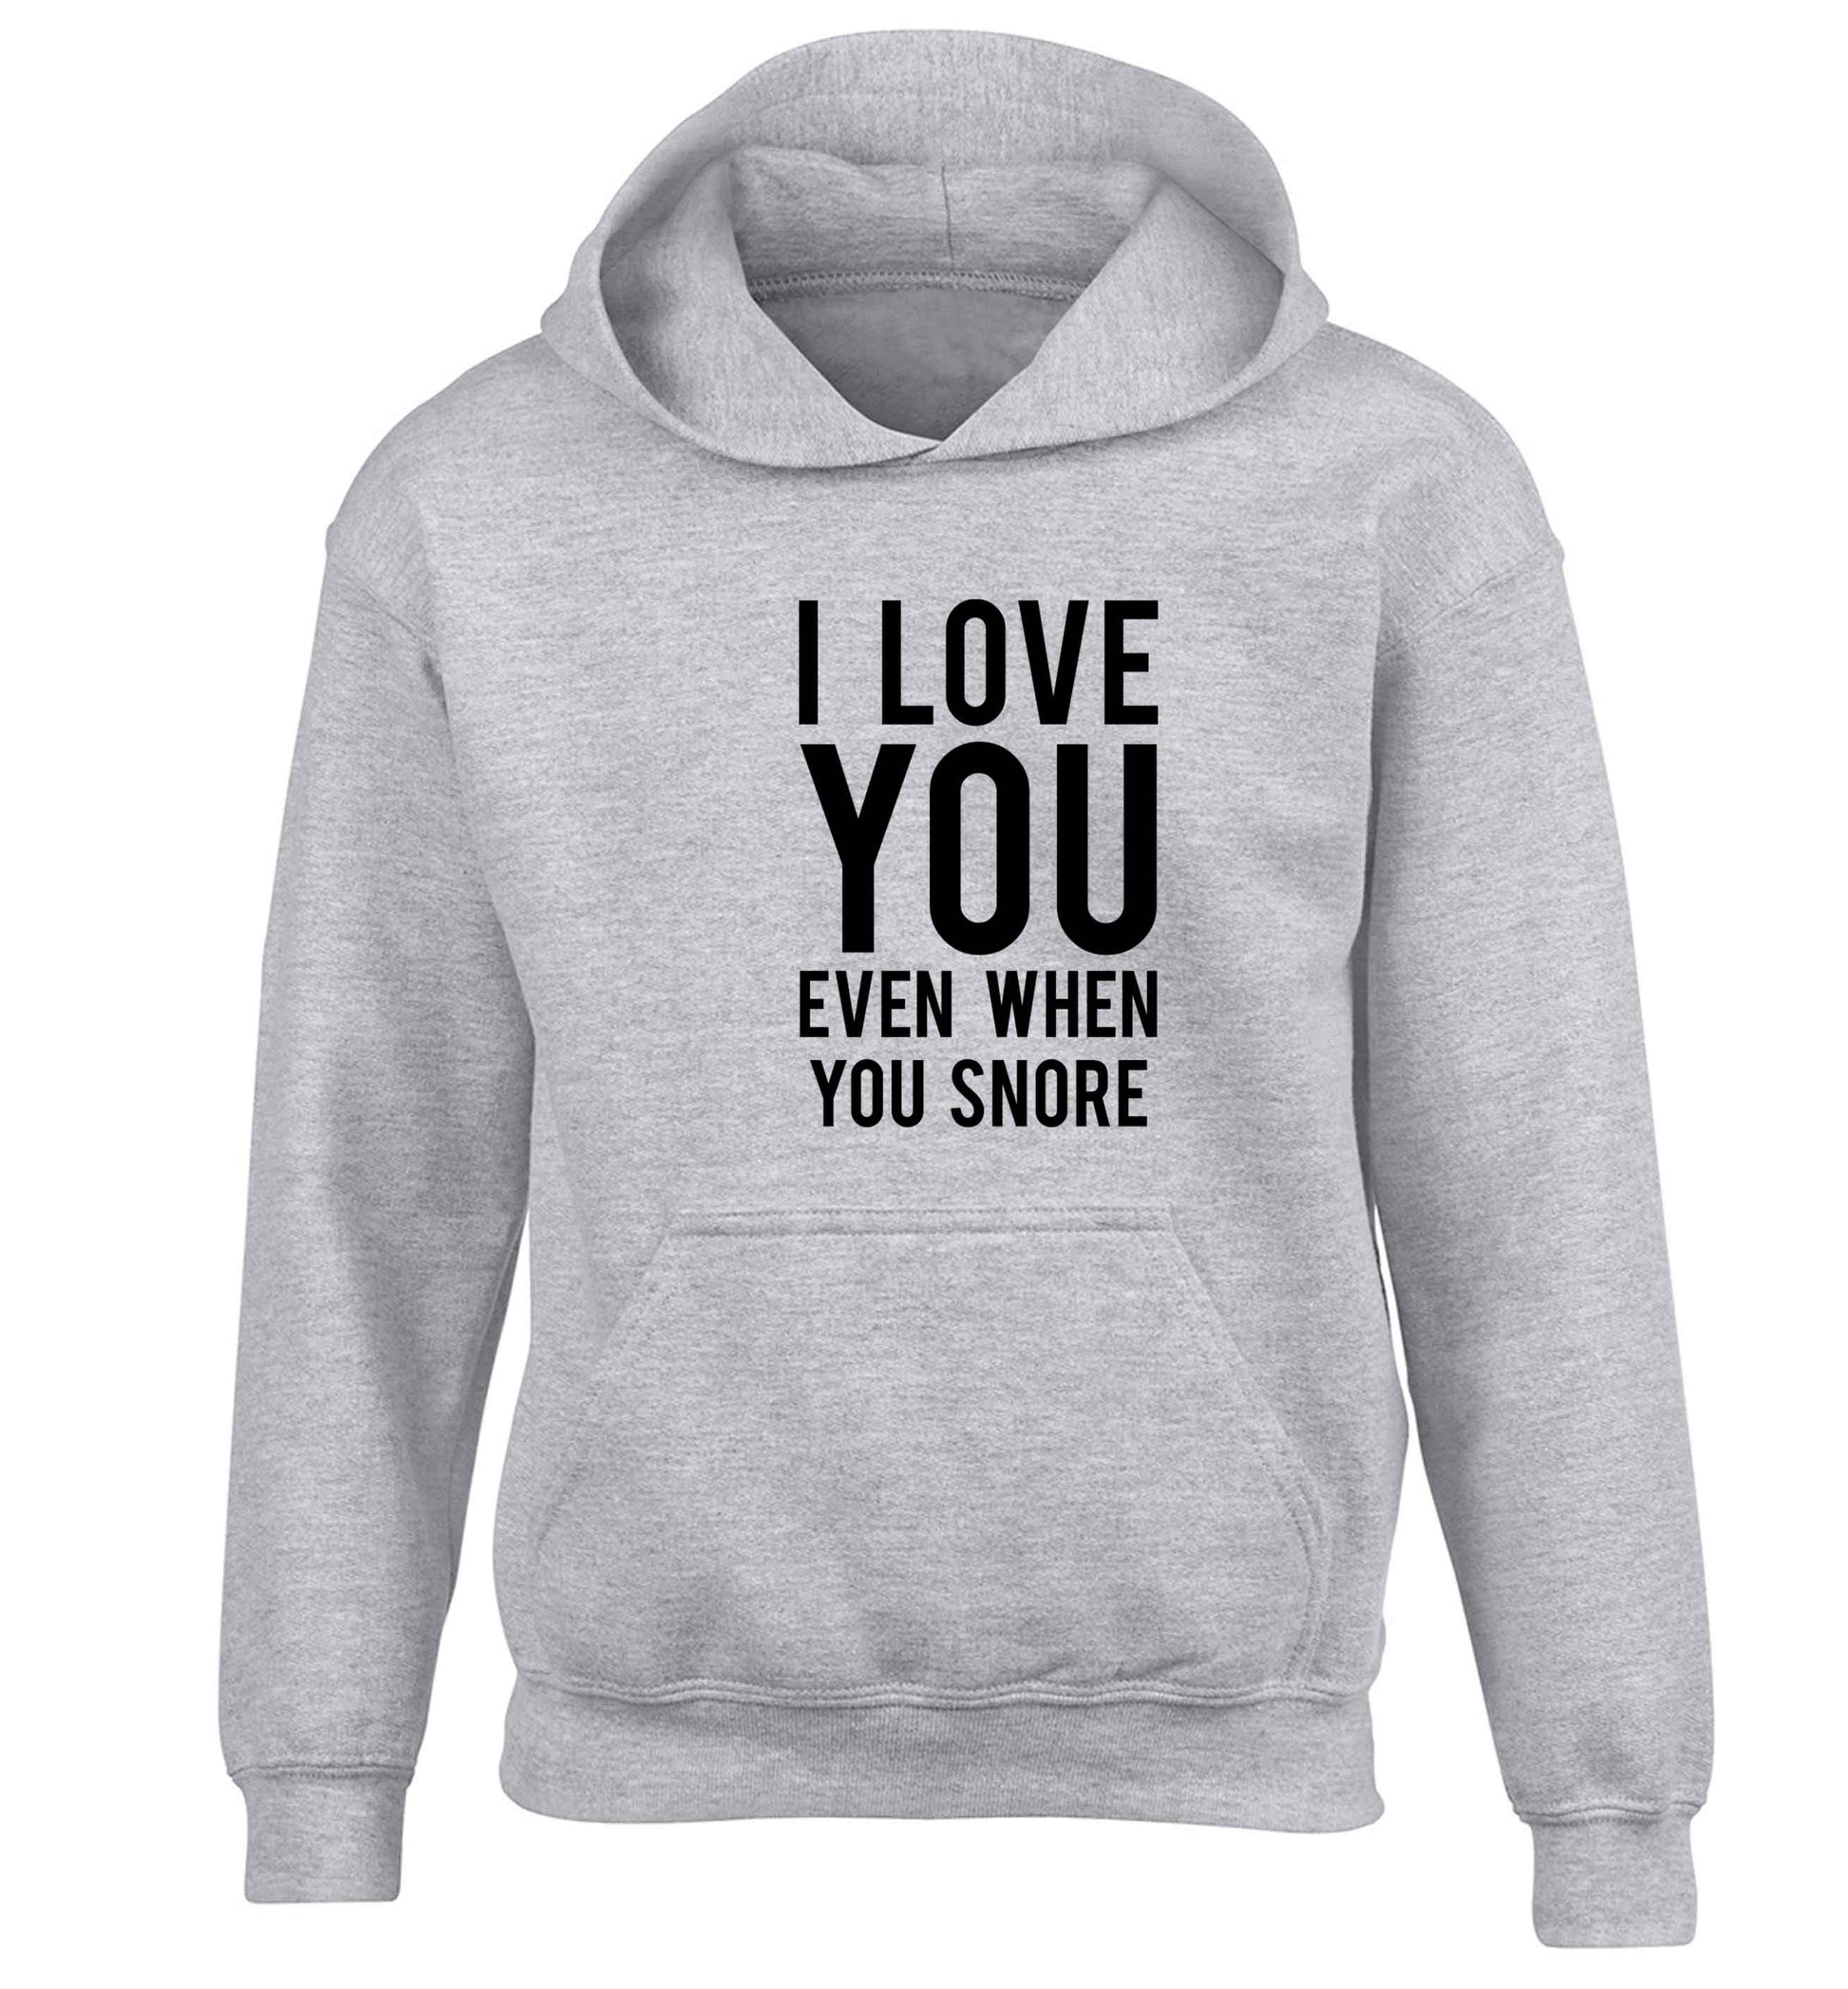 I love you even when you snore children's grey hoodie 12-13 Years